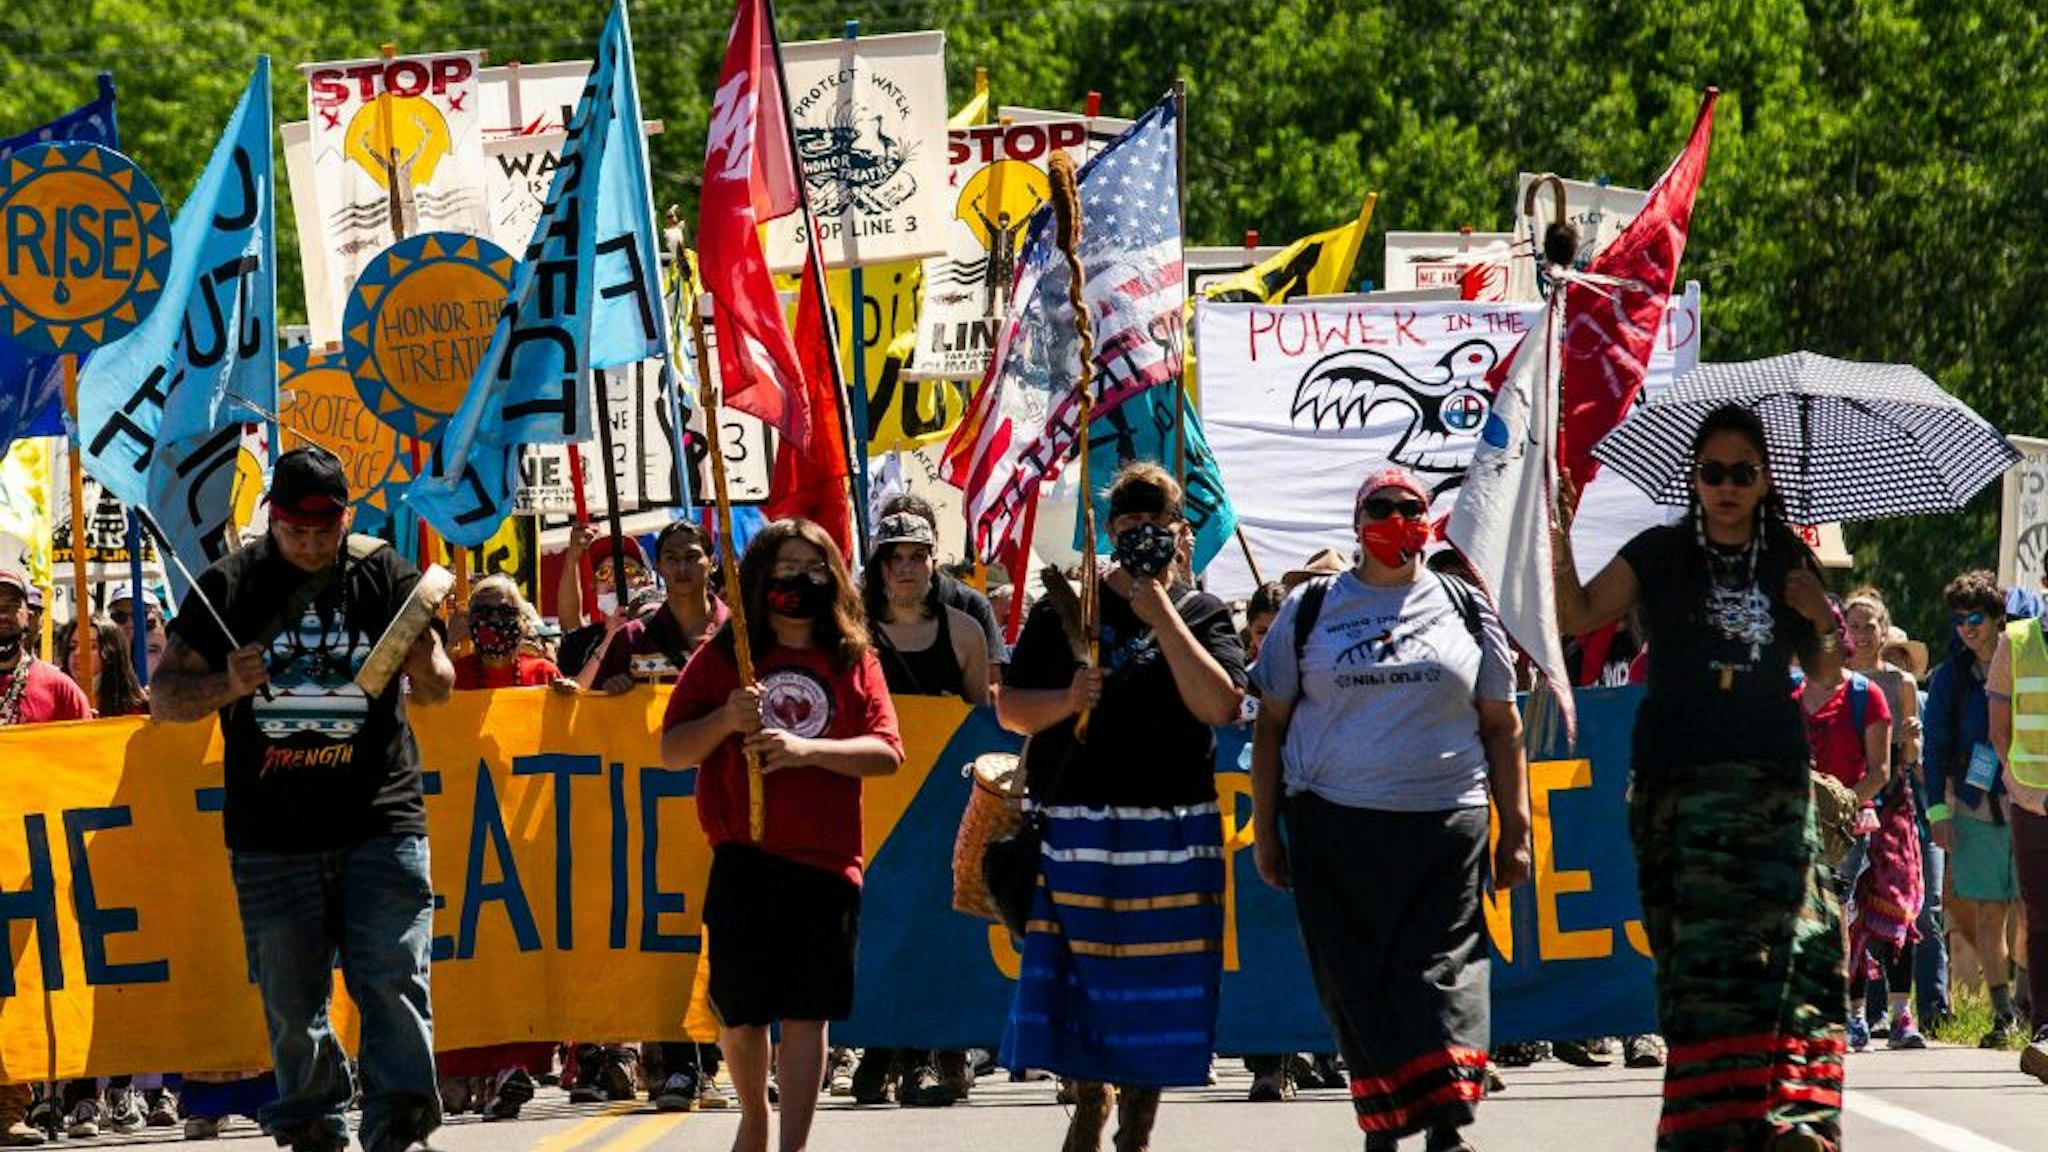 Climate activist and Indigenous community members hold a banner and flags during a rally and march in Solway, Minnesota on June 7, 2021. - Line 3 is an oil sands pipeline which runs from Hardisty, Alberta, Canada to Superior, Wisconsin in the United States. In 2014, a new route for the Line 3 pipeline was proposed to allow an increased volume of oil to be transported daily. While that project has been approved in Canada, Wisconsin, and North Dakota, it has sparked continued resistance from climate justice groups and Native American communities in Minnesota. While many people are concerned about potential oil spills along Line 3, some Native American communities in Minnesota have opposed the project on the basis of treaty rights and calling President Biden to revoke the permits and halt construction. (Photo by Kerem Yucel / AFP) (Photo by KEREM YUCEL/AFP via Getty Images)